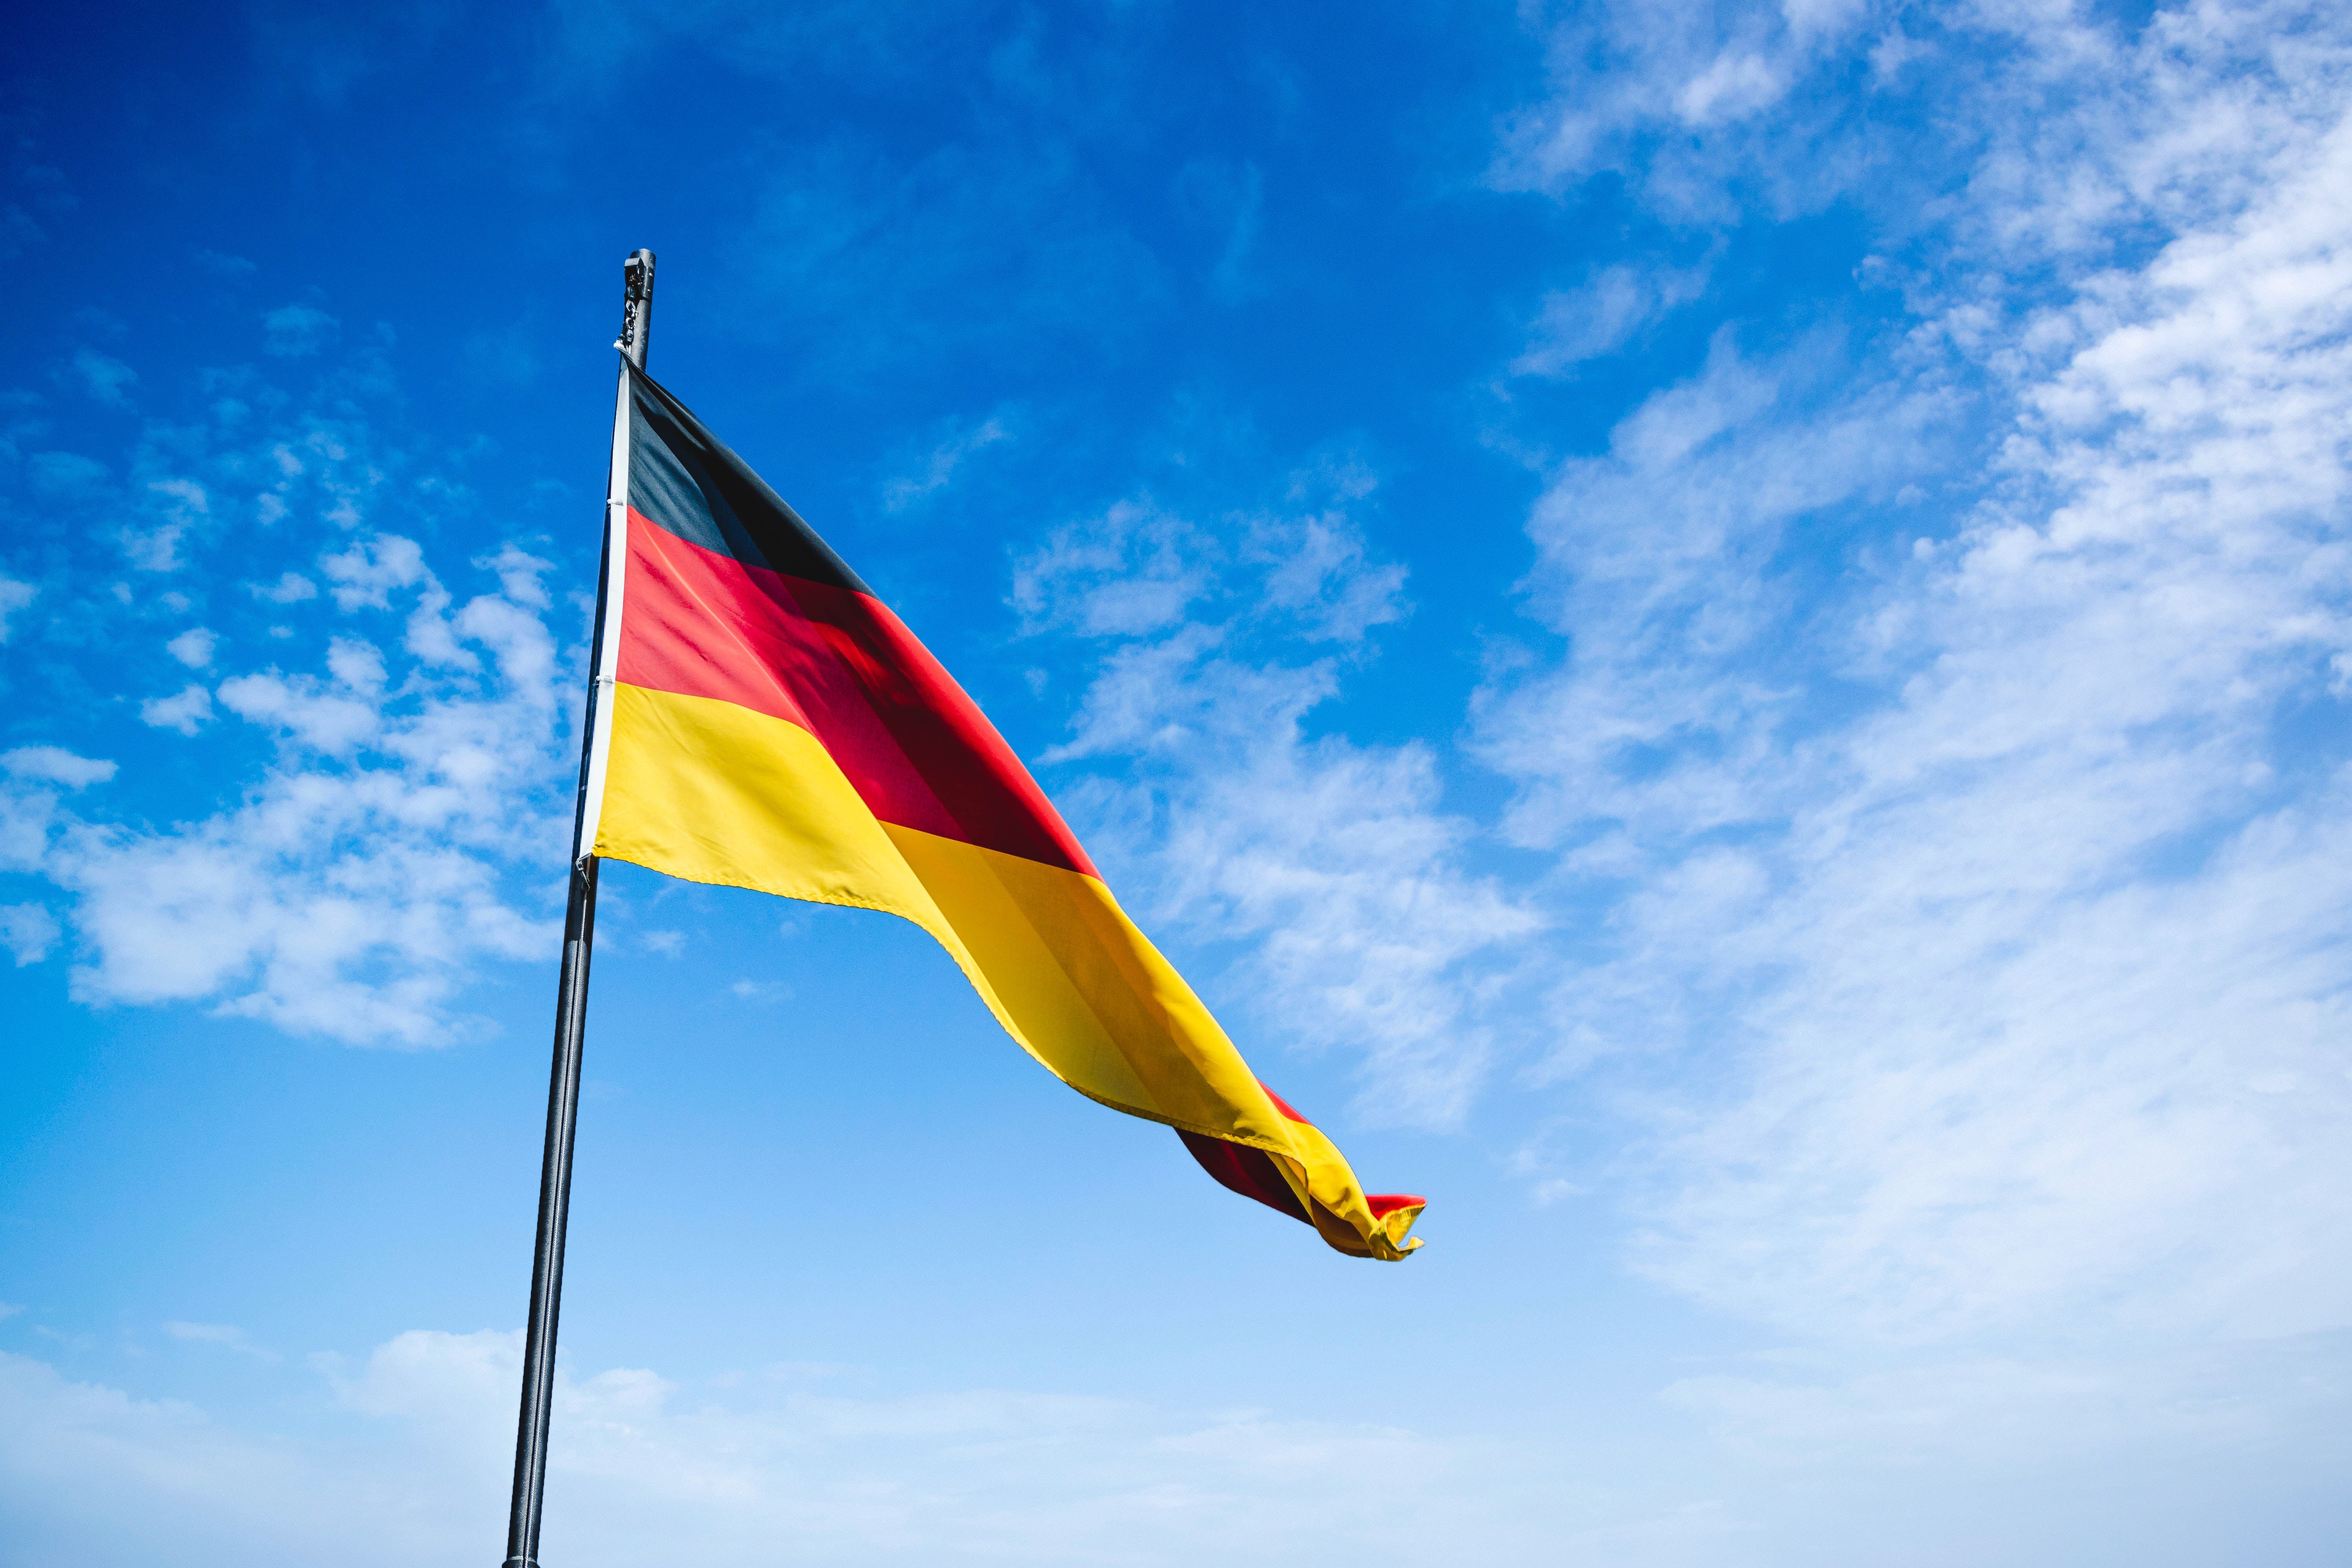 Germany's Recreational Cannabis Legalization Plan Is Leaked, Here's What's In It